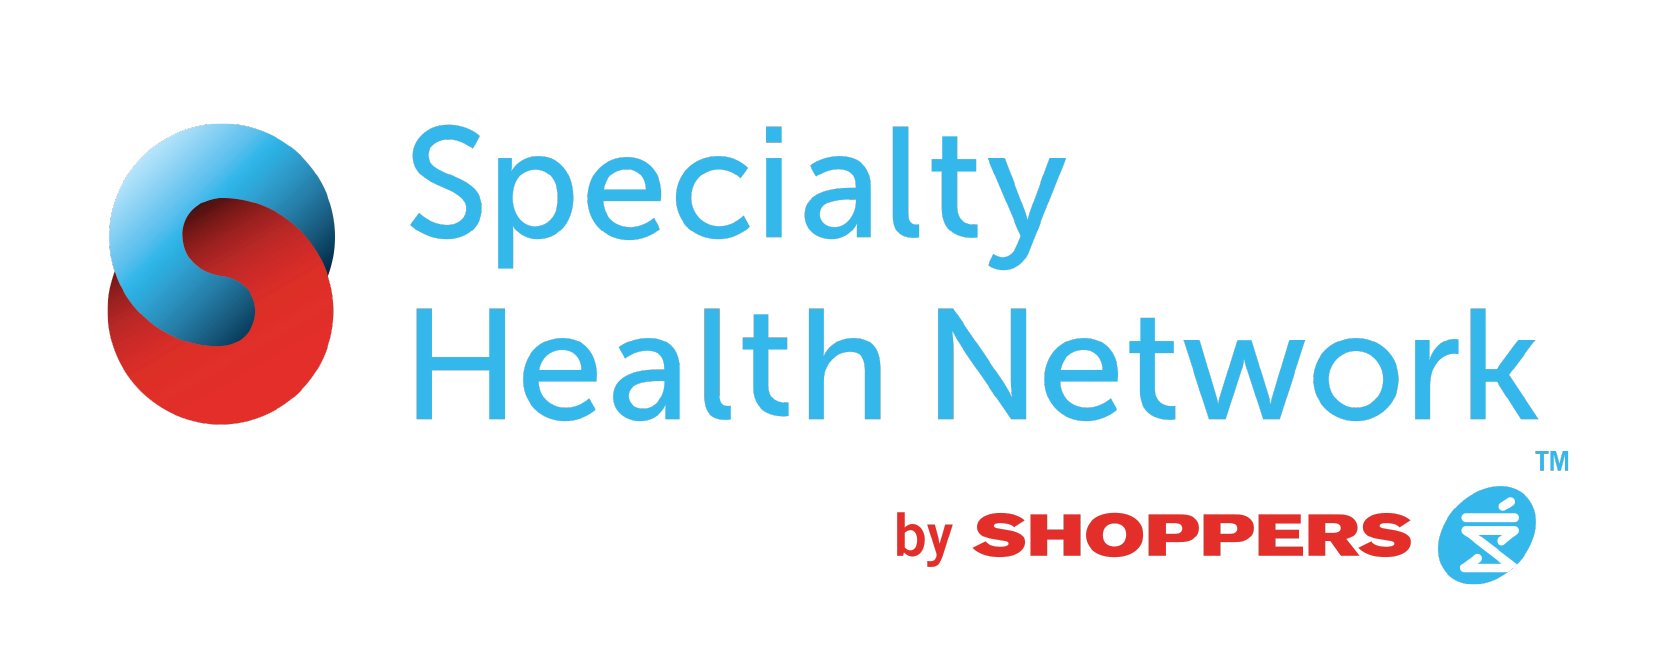 Specialty health network by shoppers logo